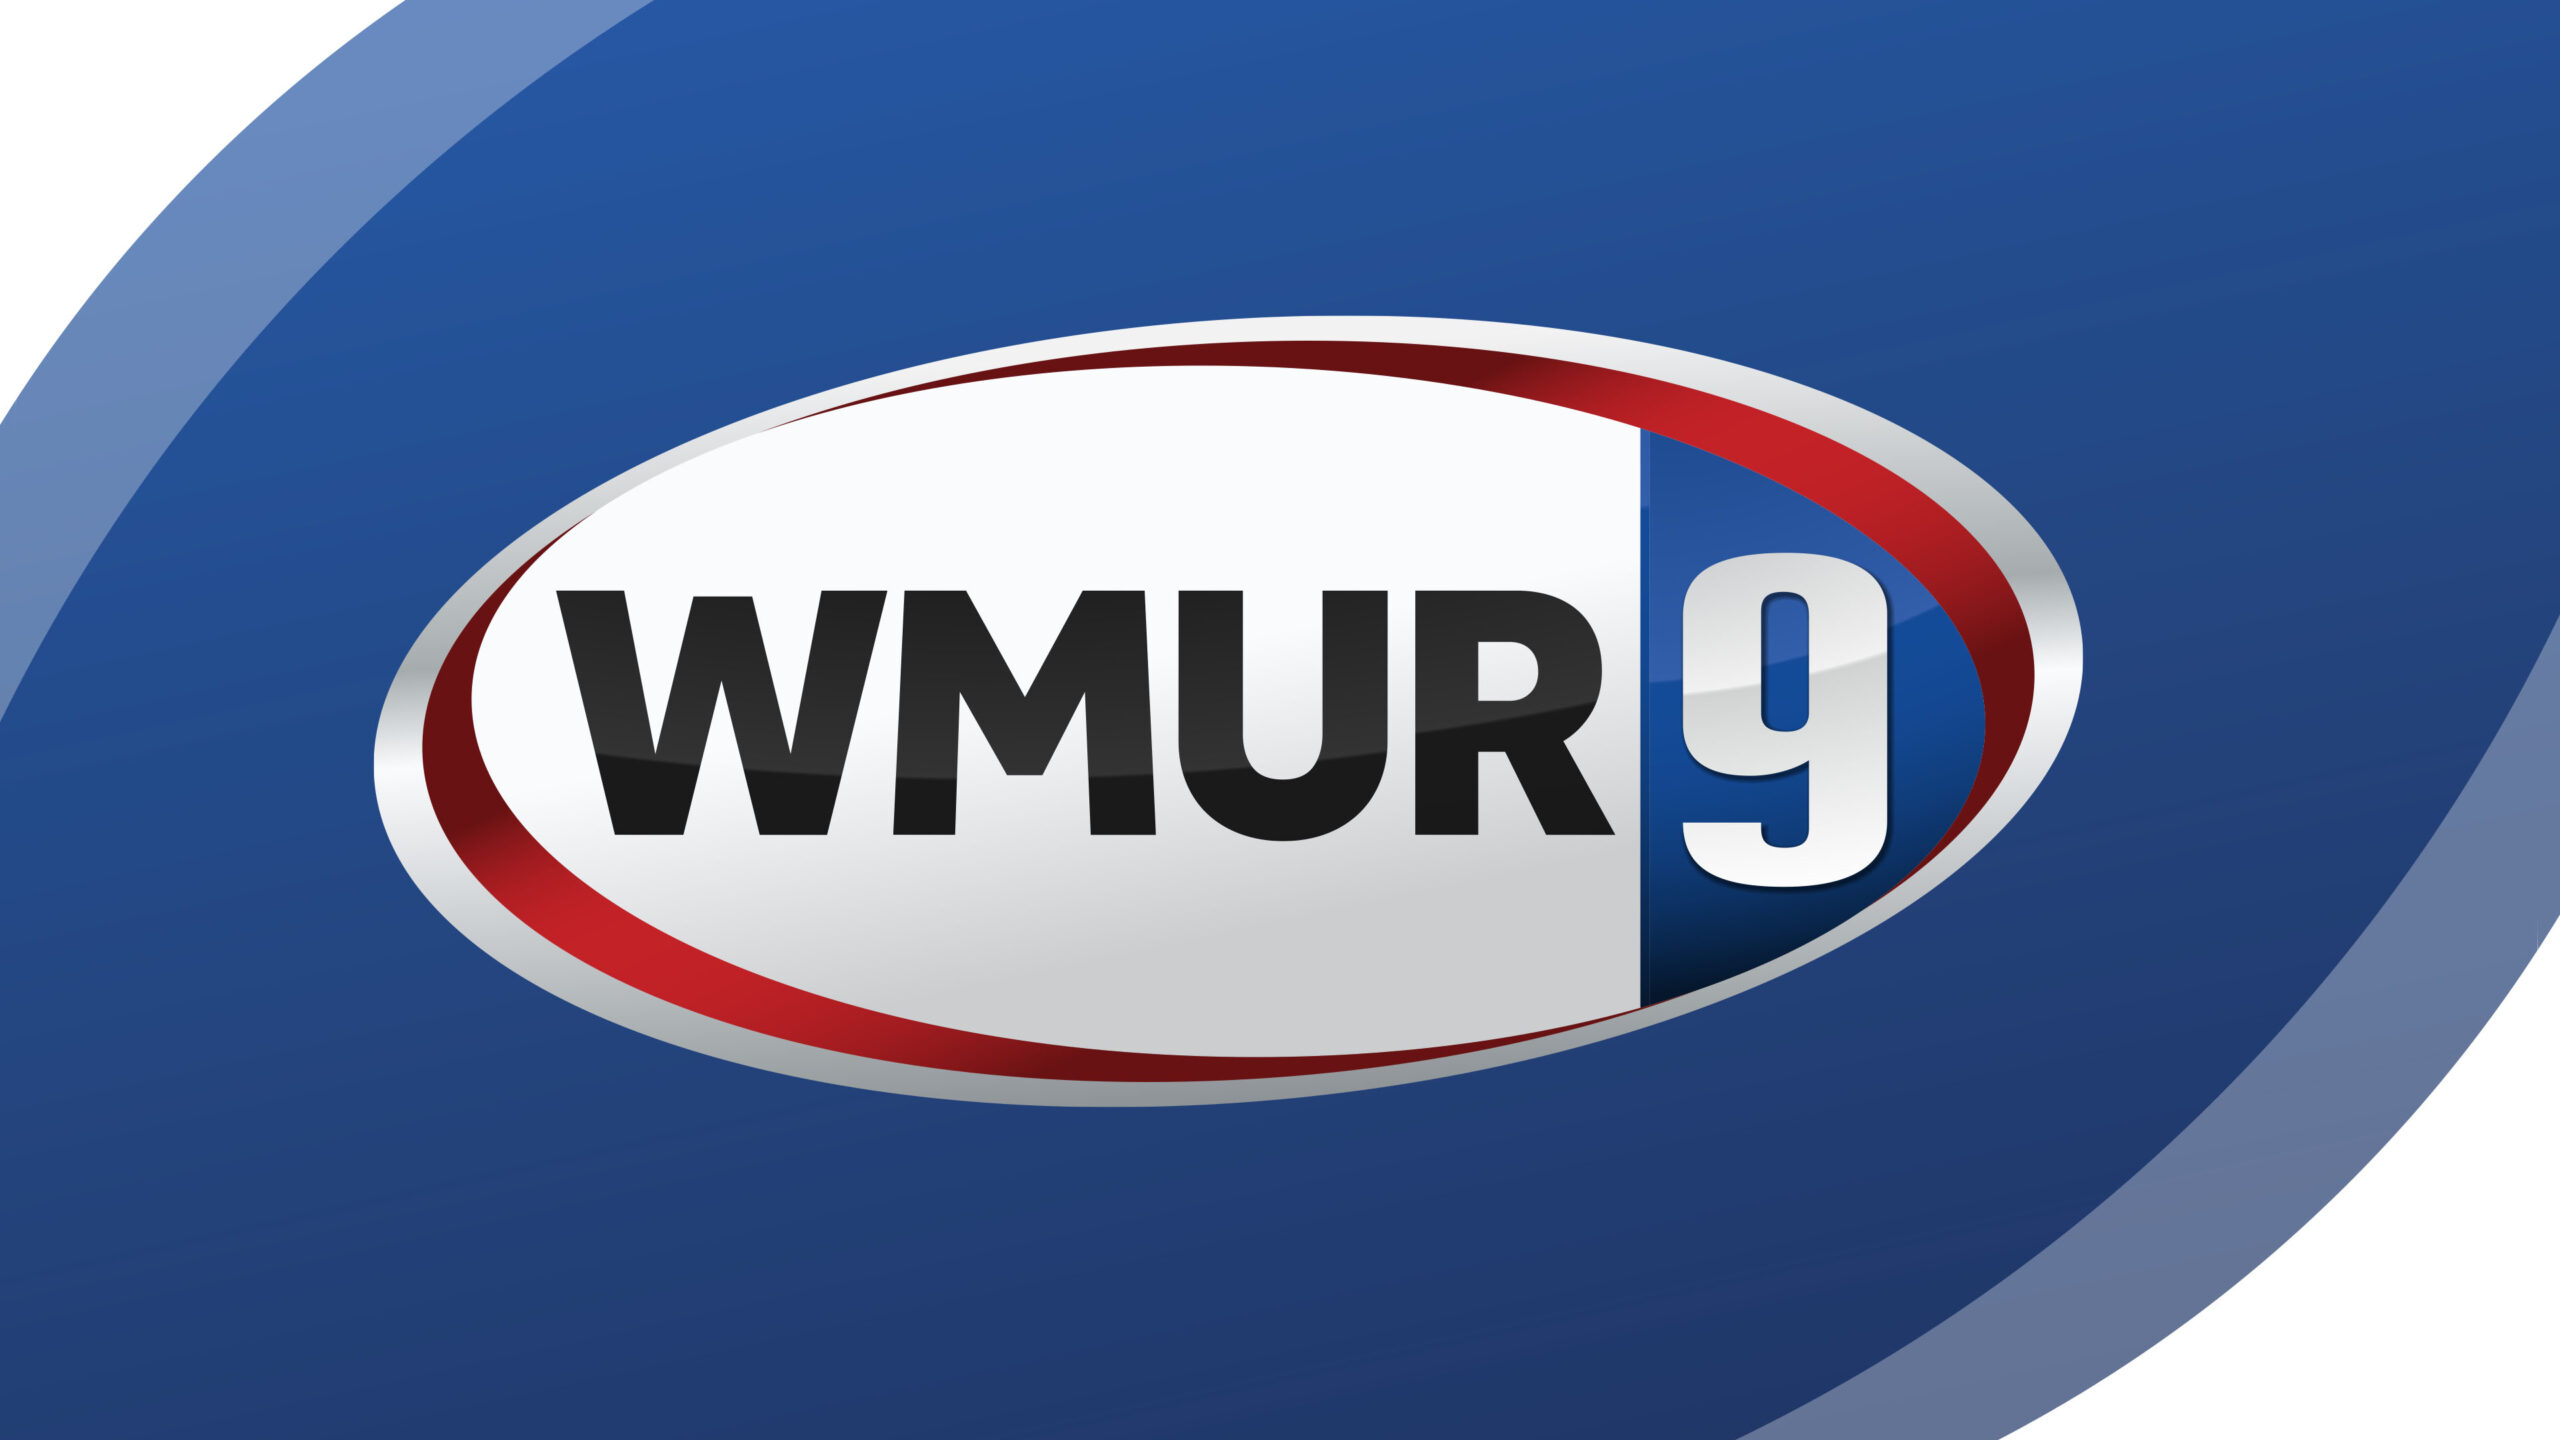 WMUR news and weather streaming free